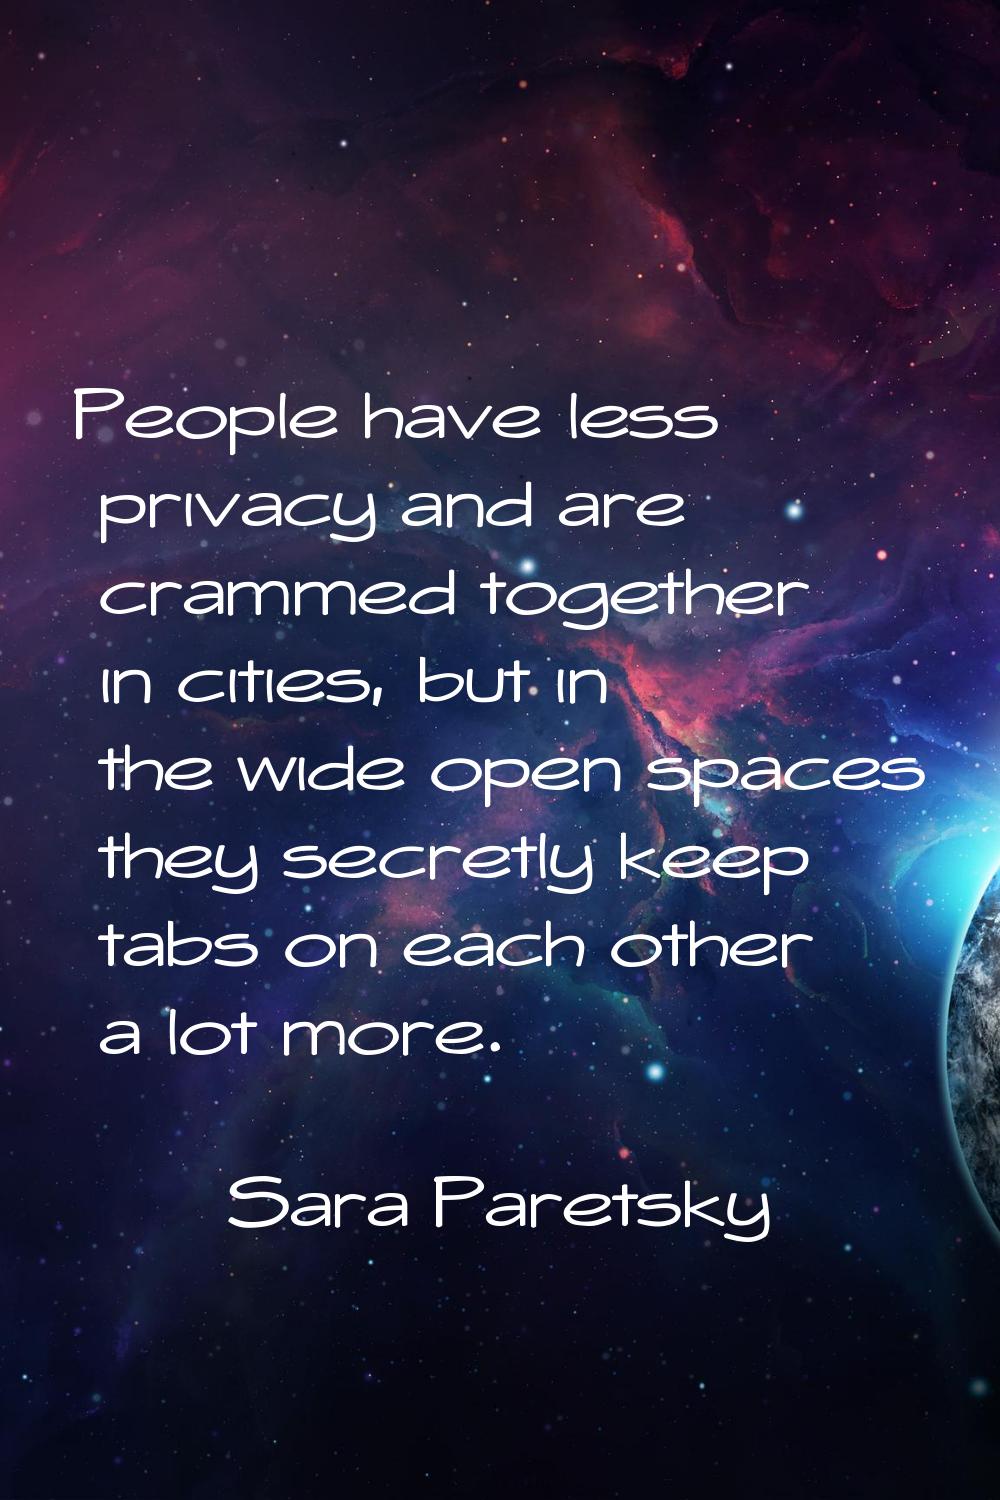 People have less privacy and are crammed together in cities, but in the wide open spaces they secre